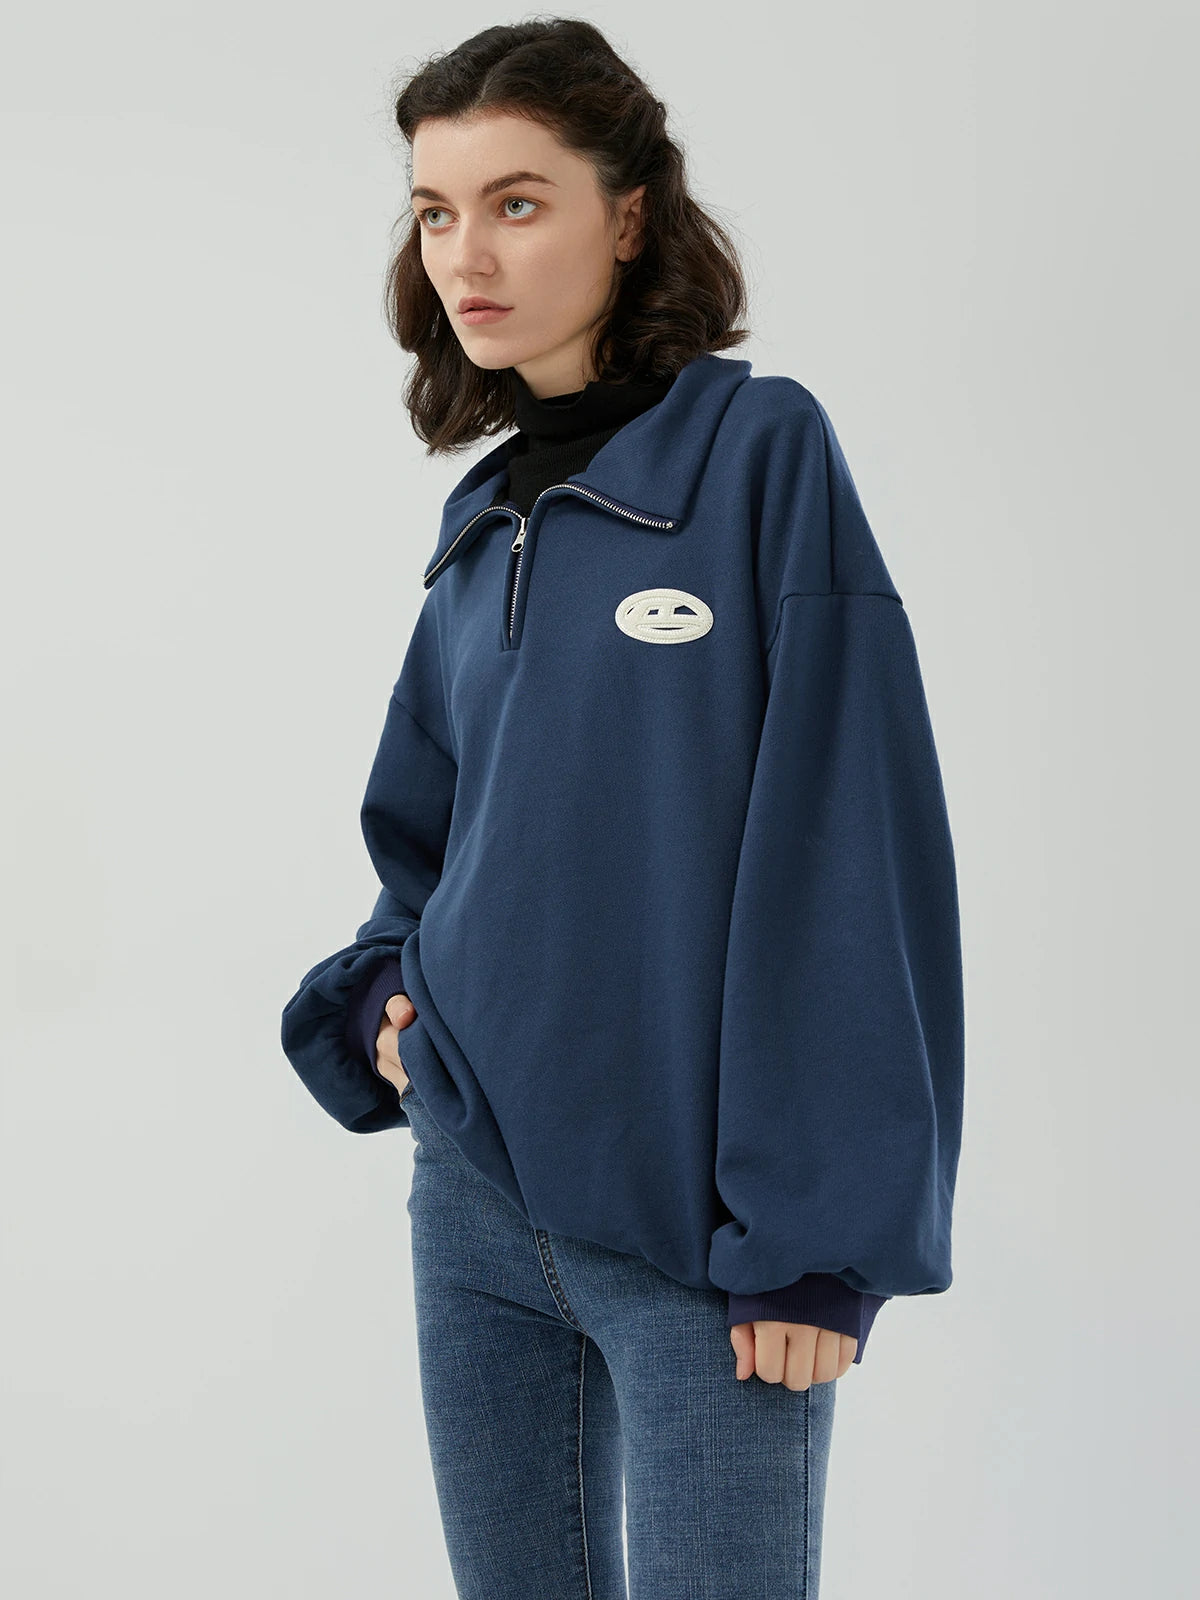 Fashionable and comfortable half-zip sweatshirt in a soothing navy blue shade